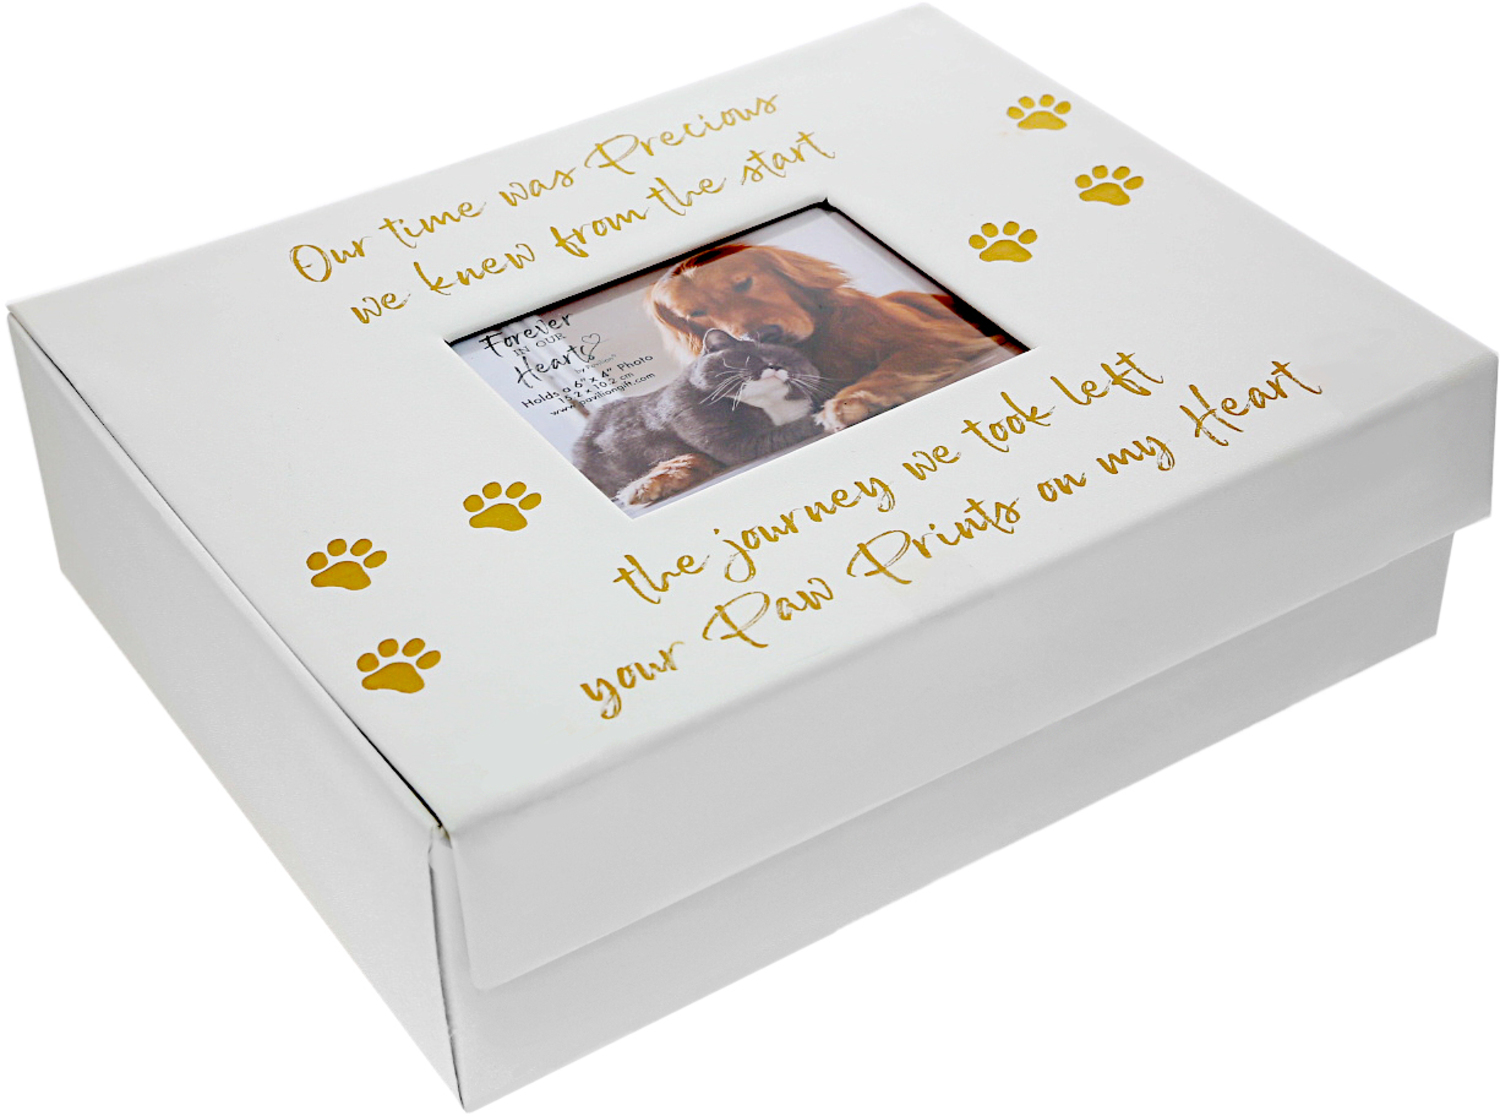 Pawprints On My Heart by Forever in our Hearts - Pawprints On My Heart - 11" x 9" Memory Box